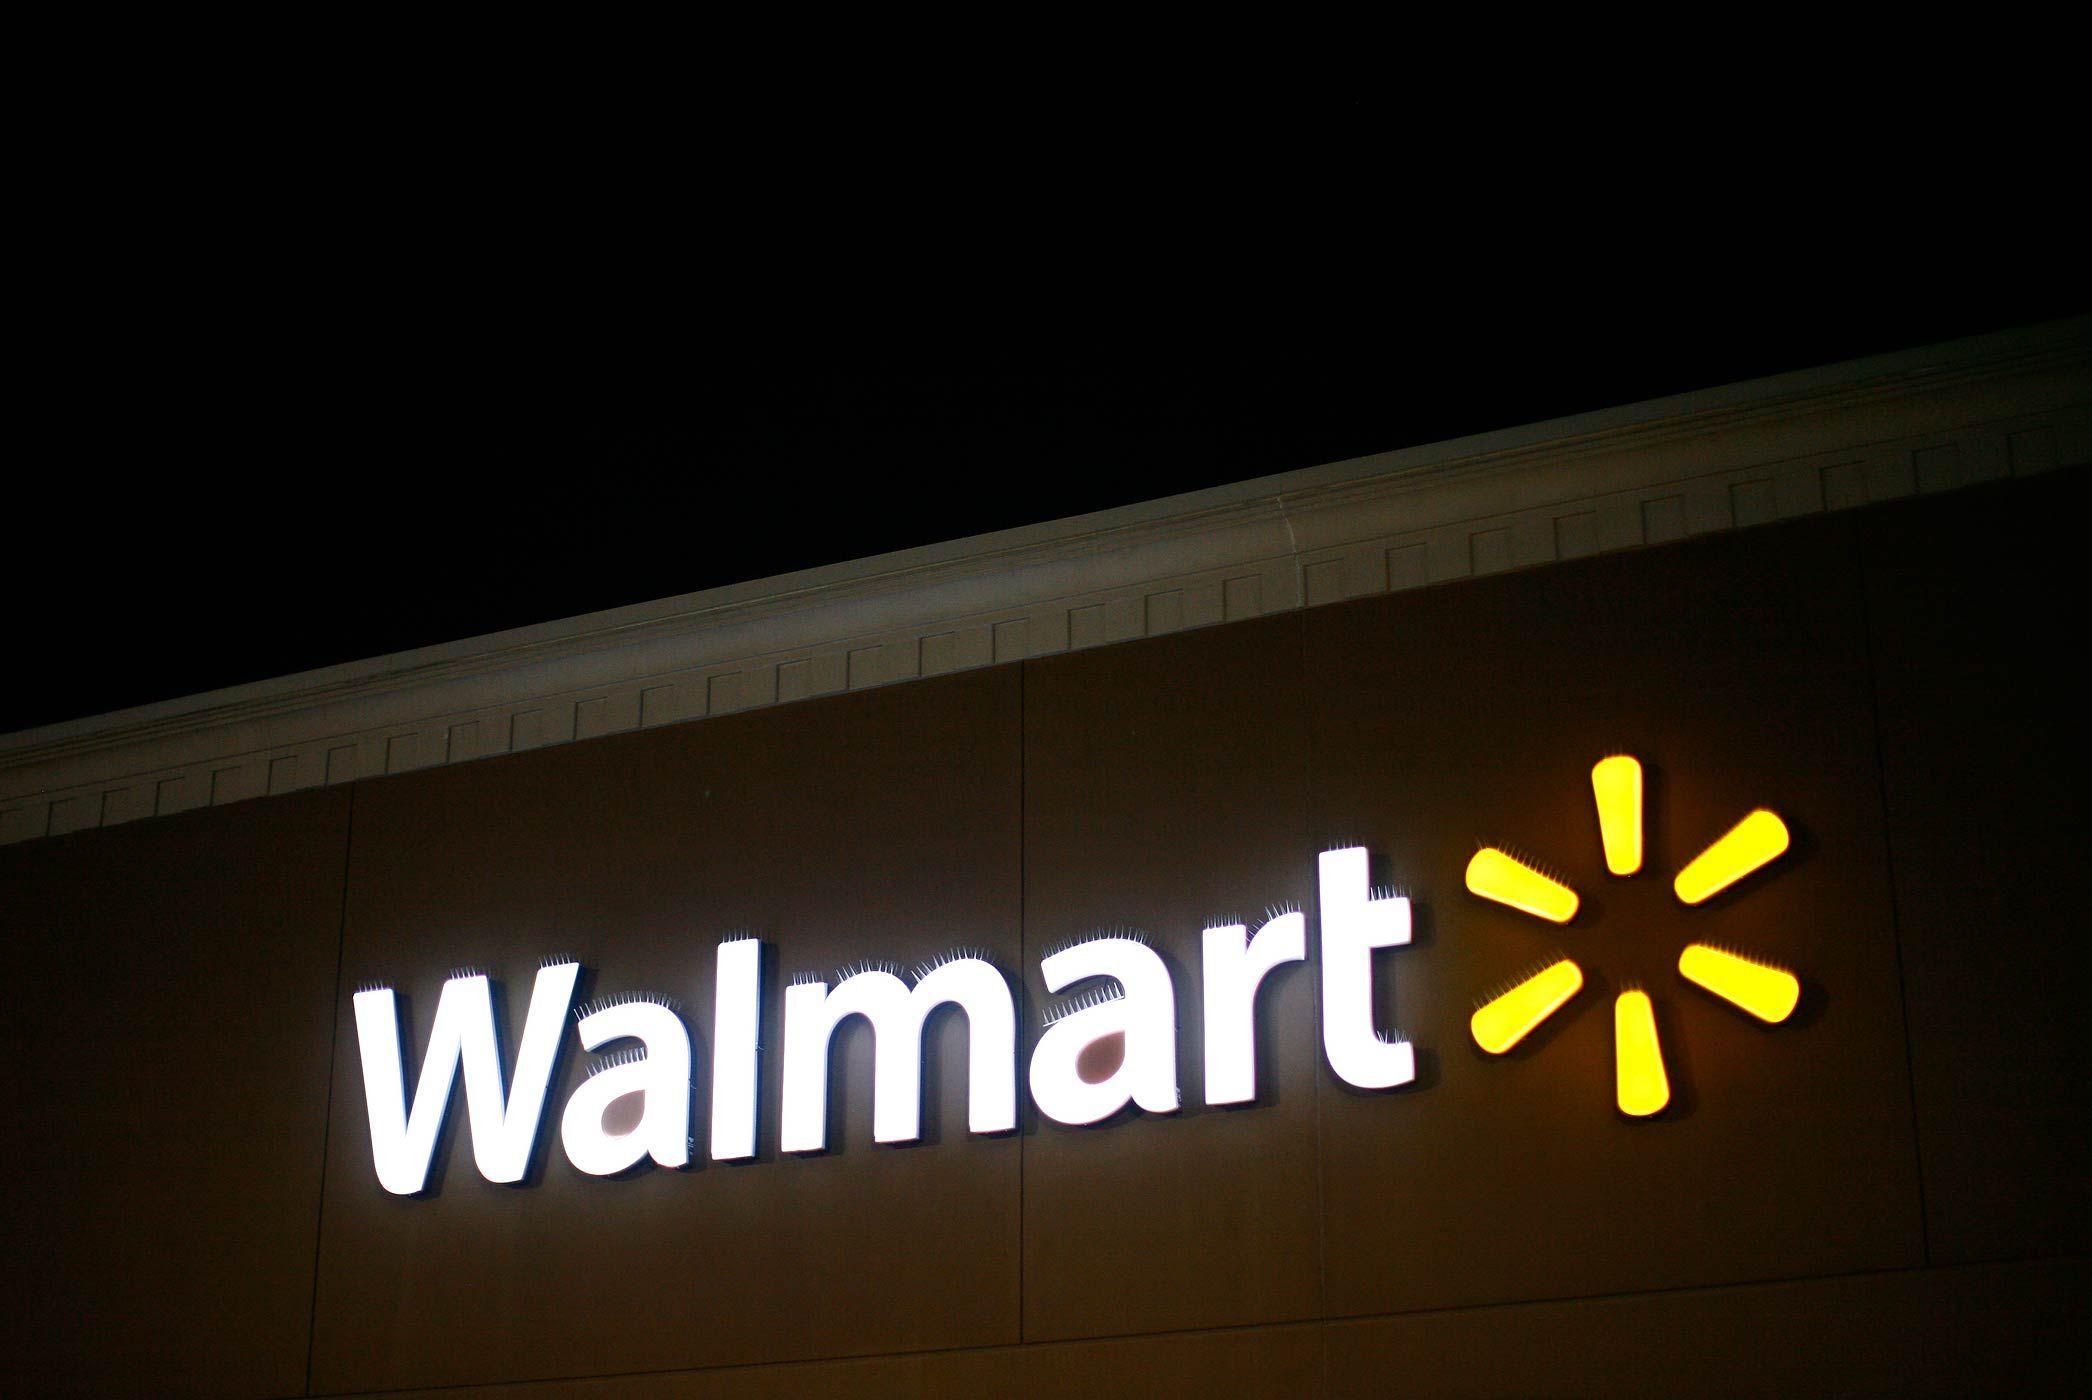 Pay Walmart Logo - Walmart Must Pay $188 Million to Settle Claims of Cut Rest Breaks | Time